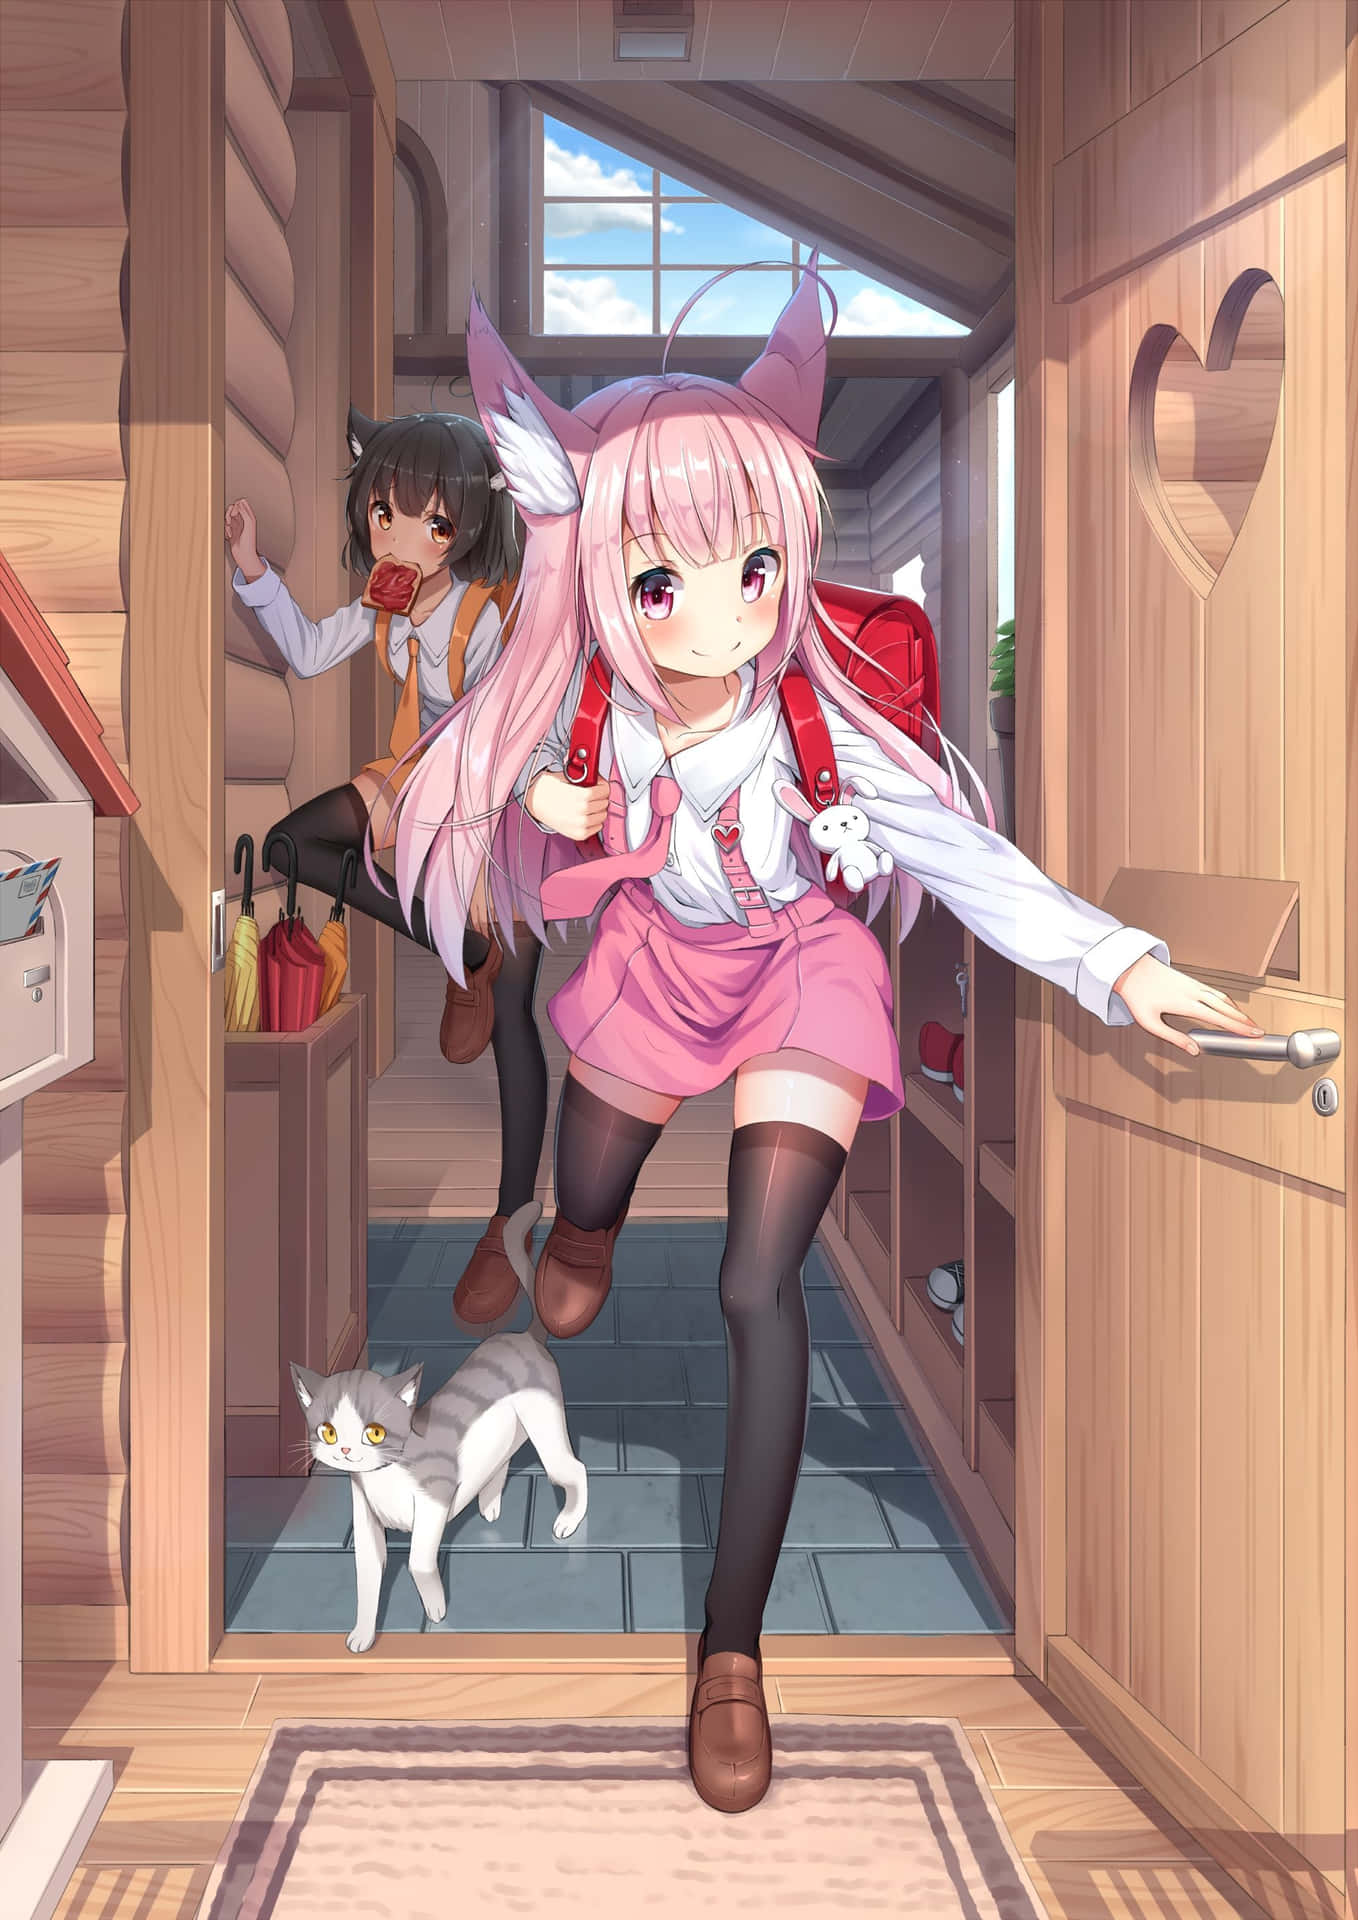 Anime Girl With Cat Ears Entering Home